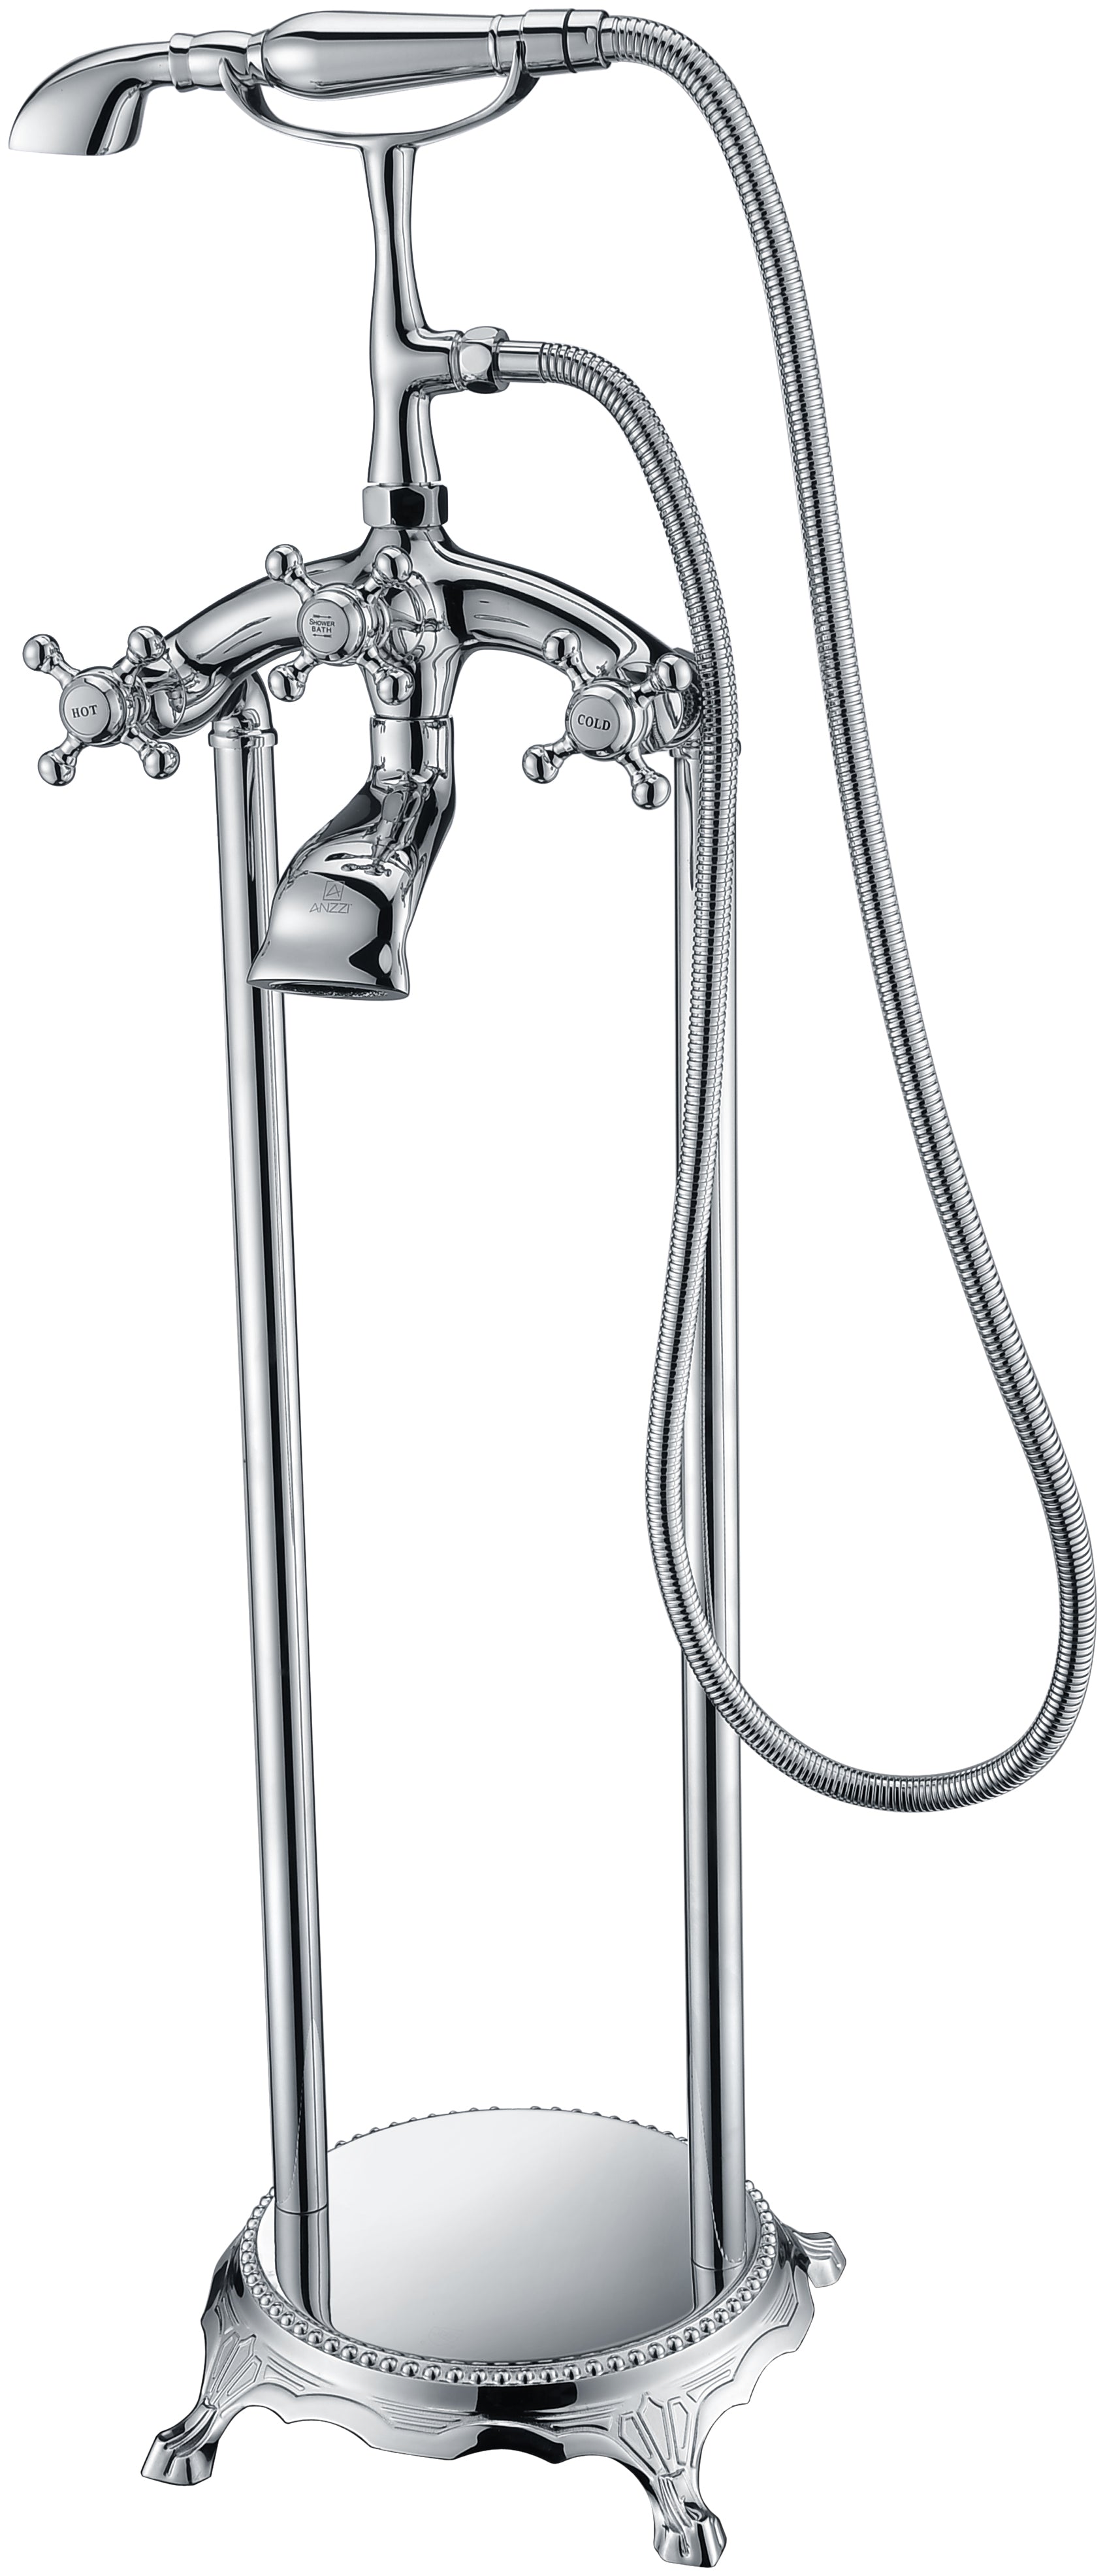 FS-AZ0052CH - Tugela 3-Handle Claw Foot Tub Faucet with Hand Shower in Polished Chrome